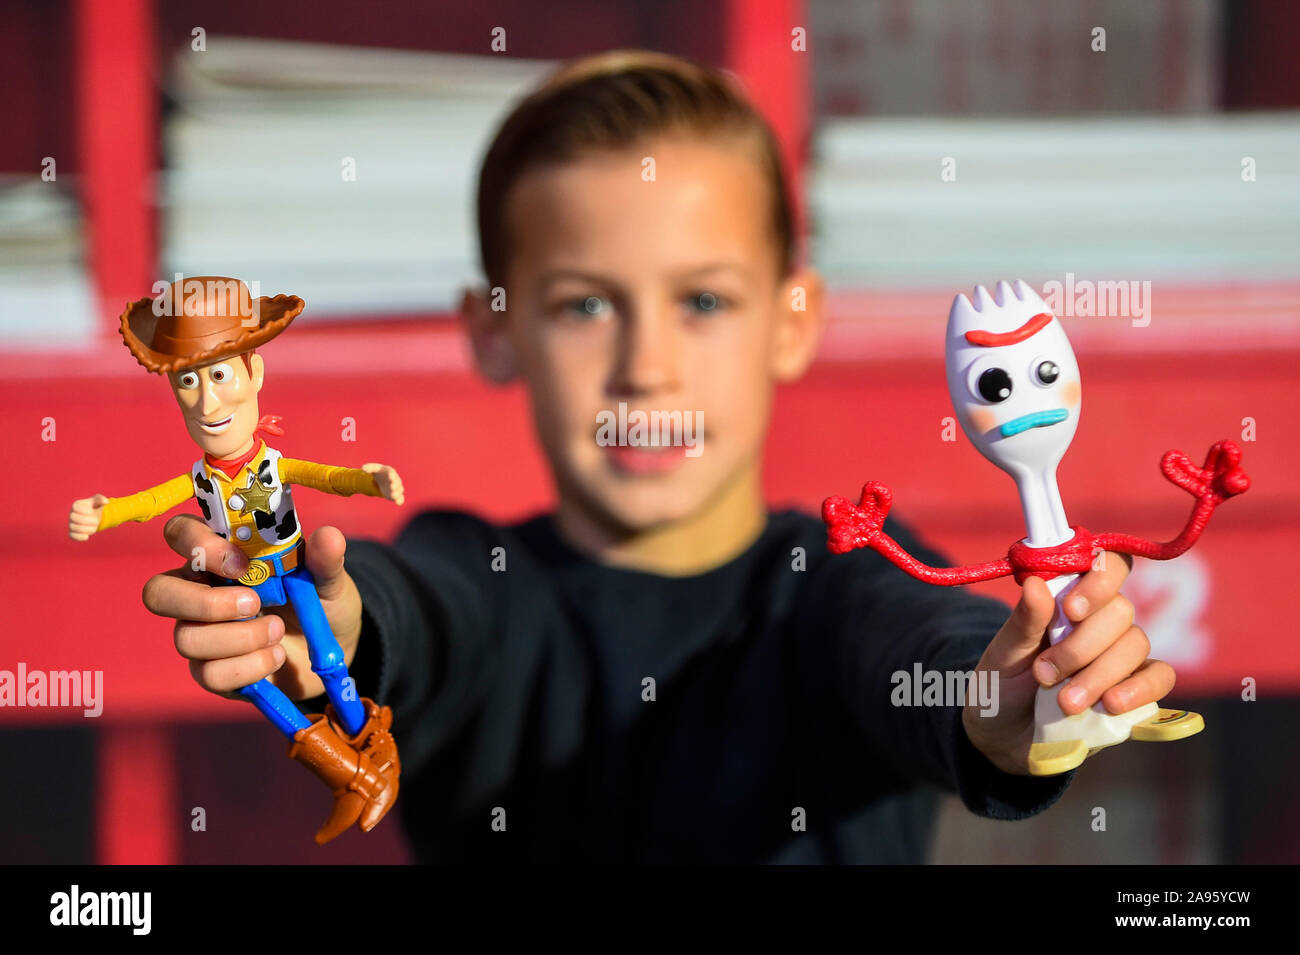 Forky Stock Photos - 54 Images